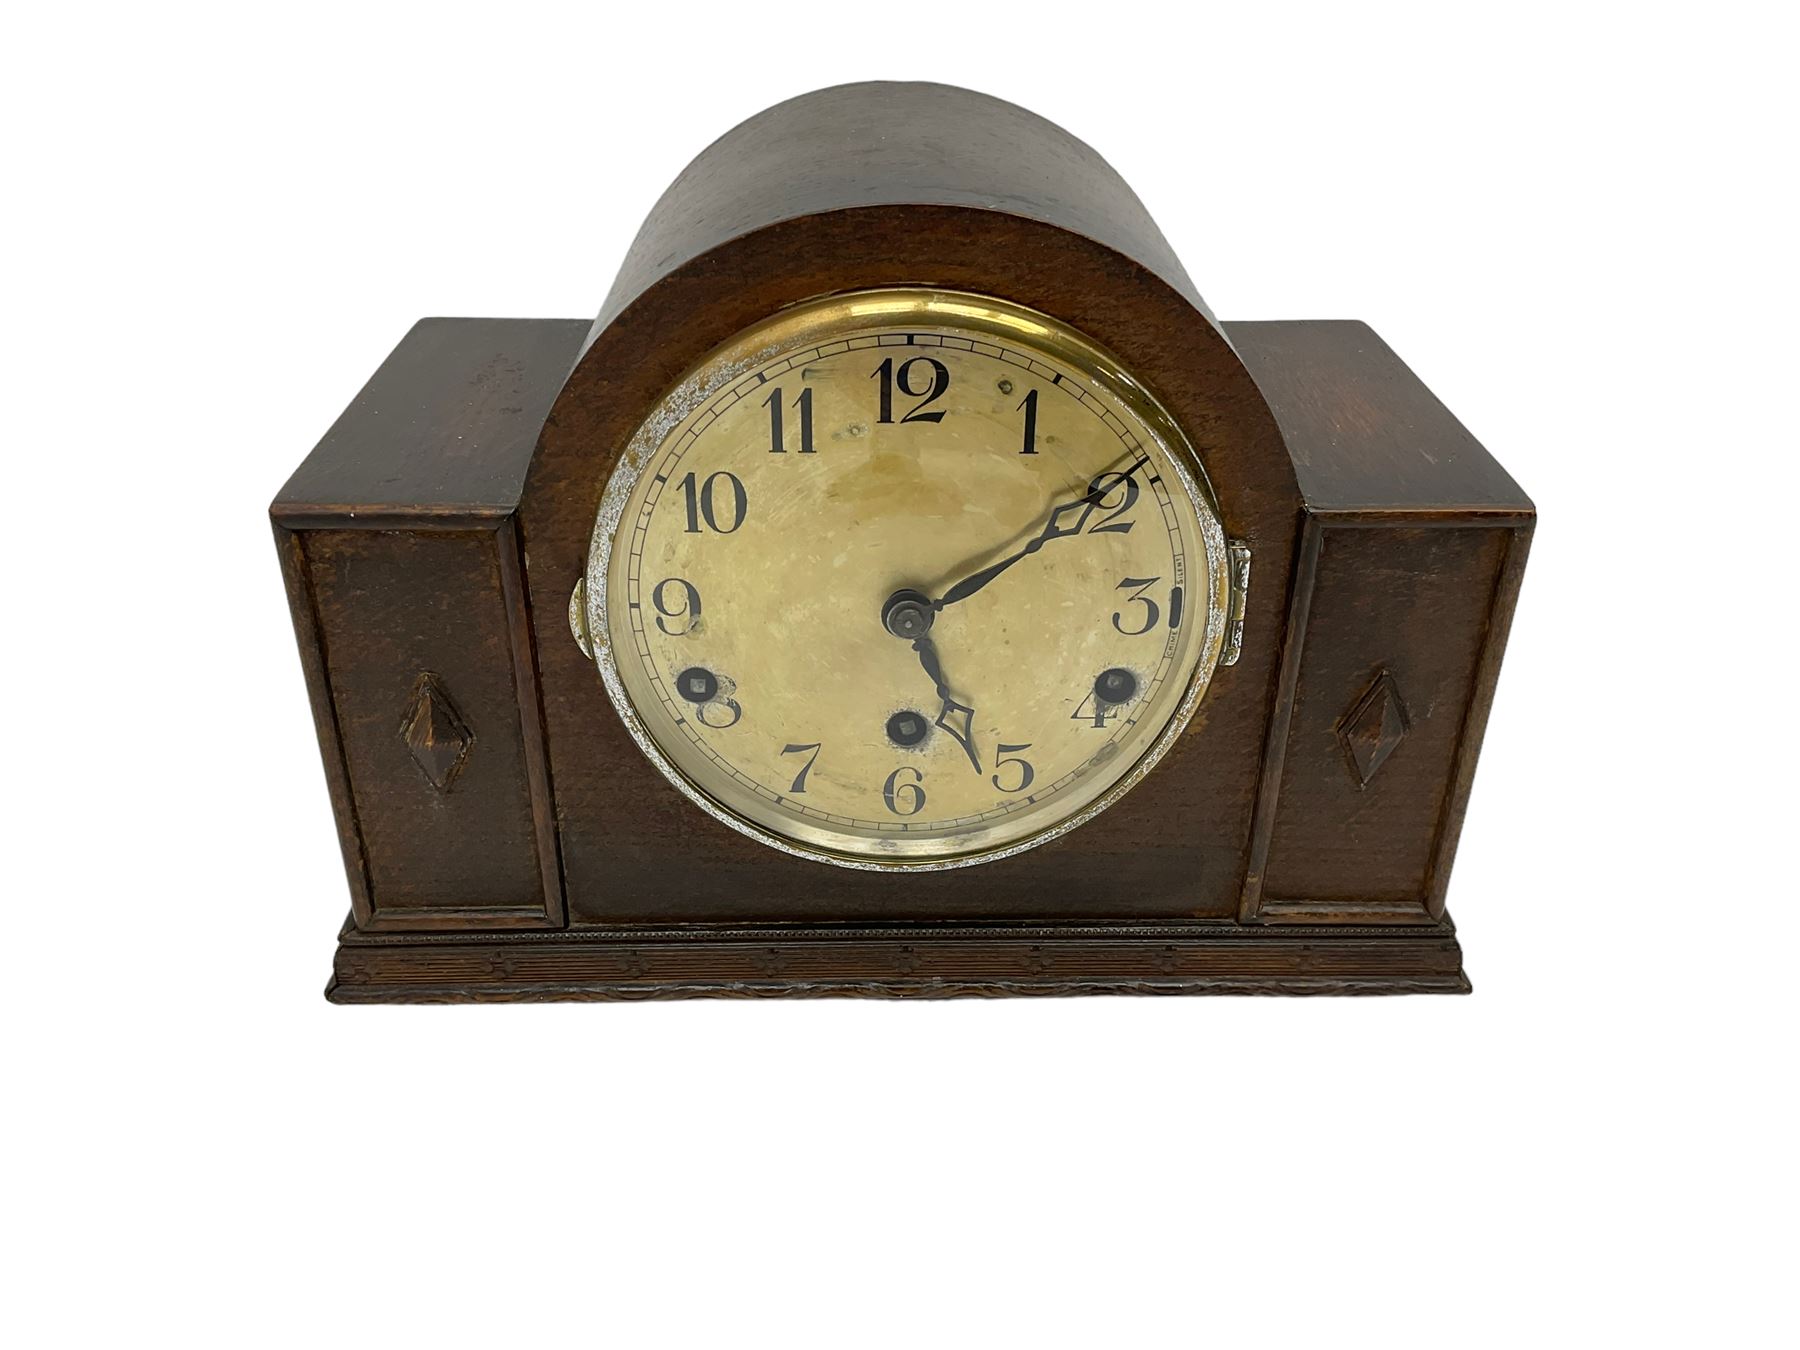 1930s Westminster chime clock - Image 4 of 4